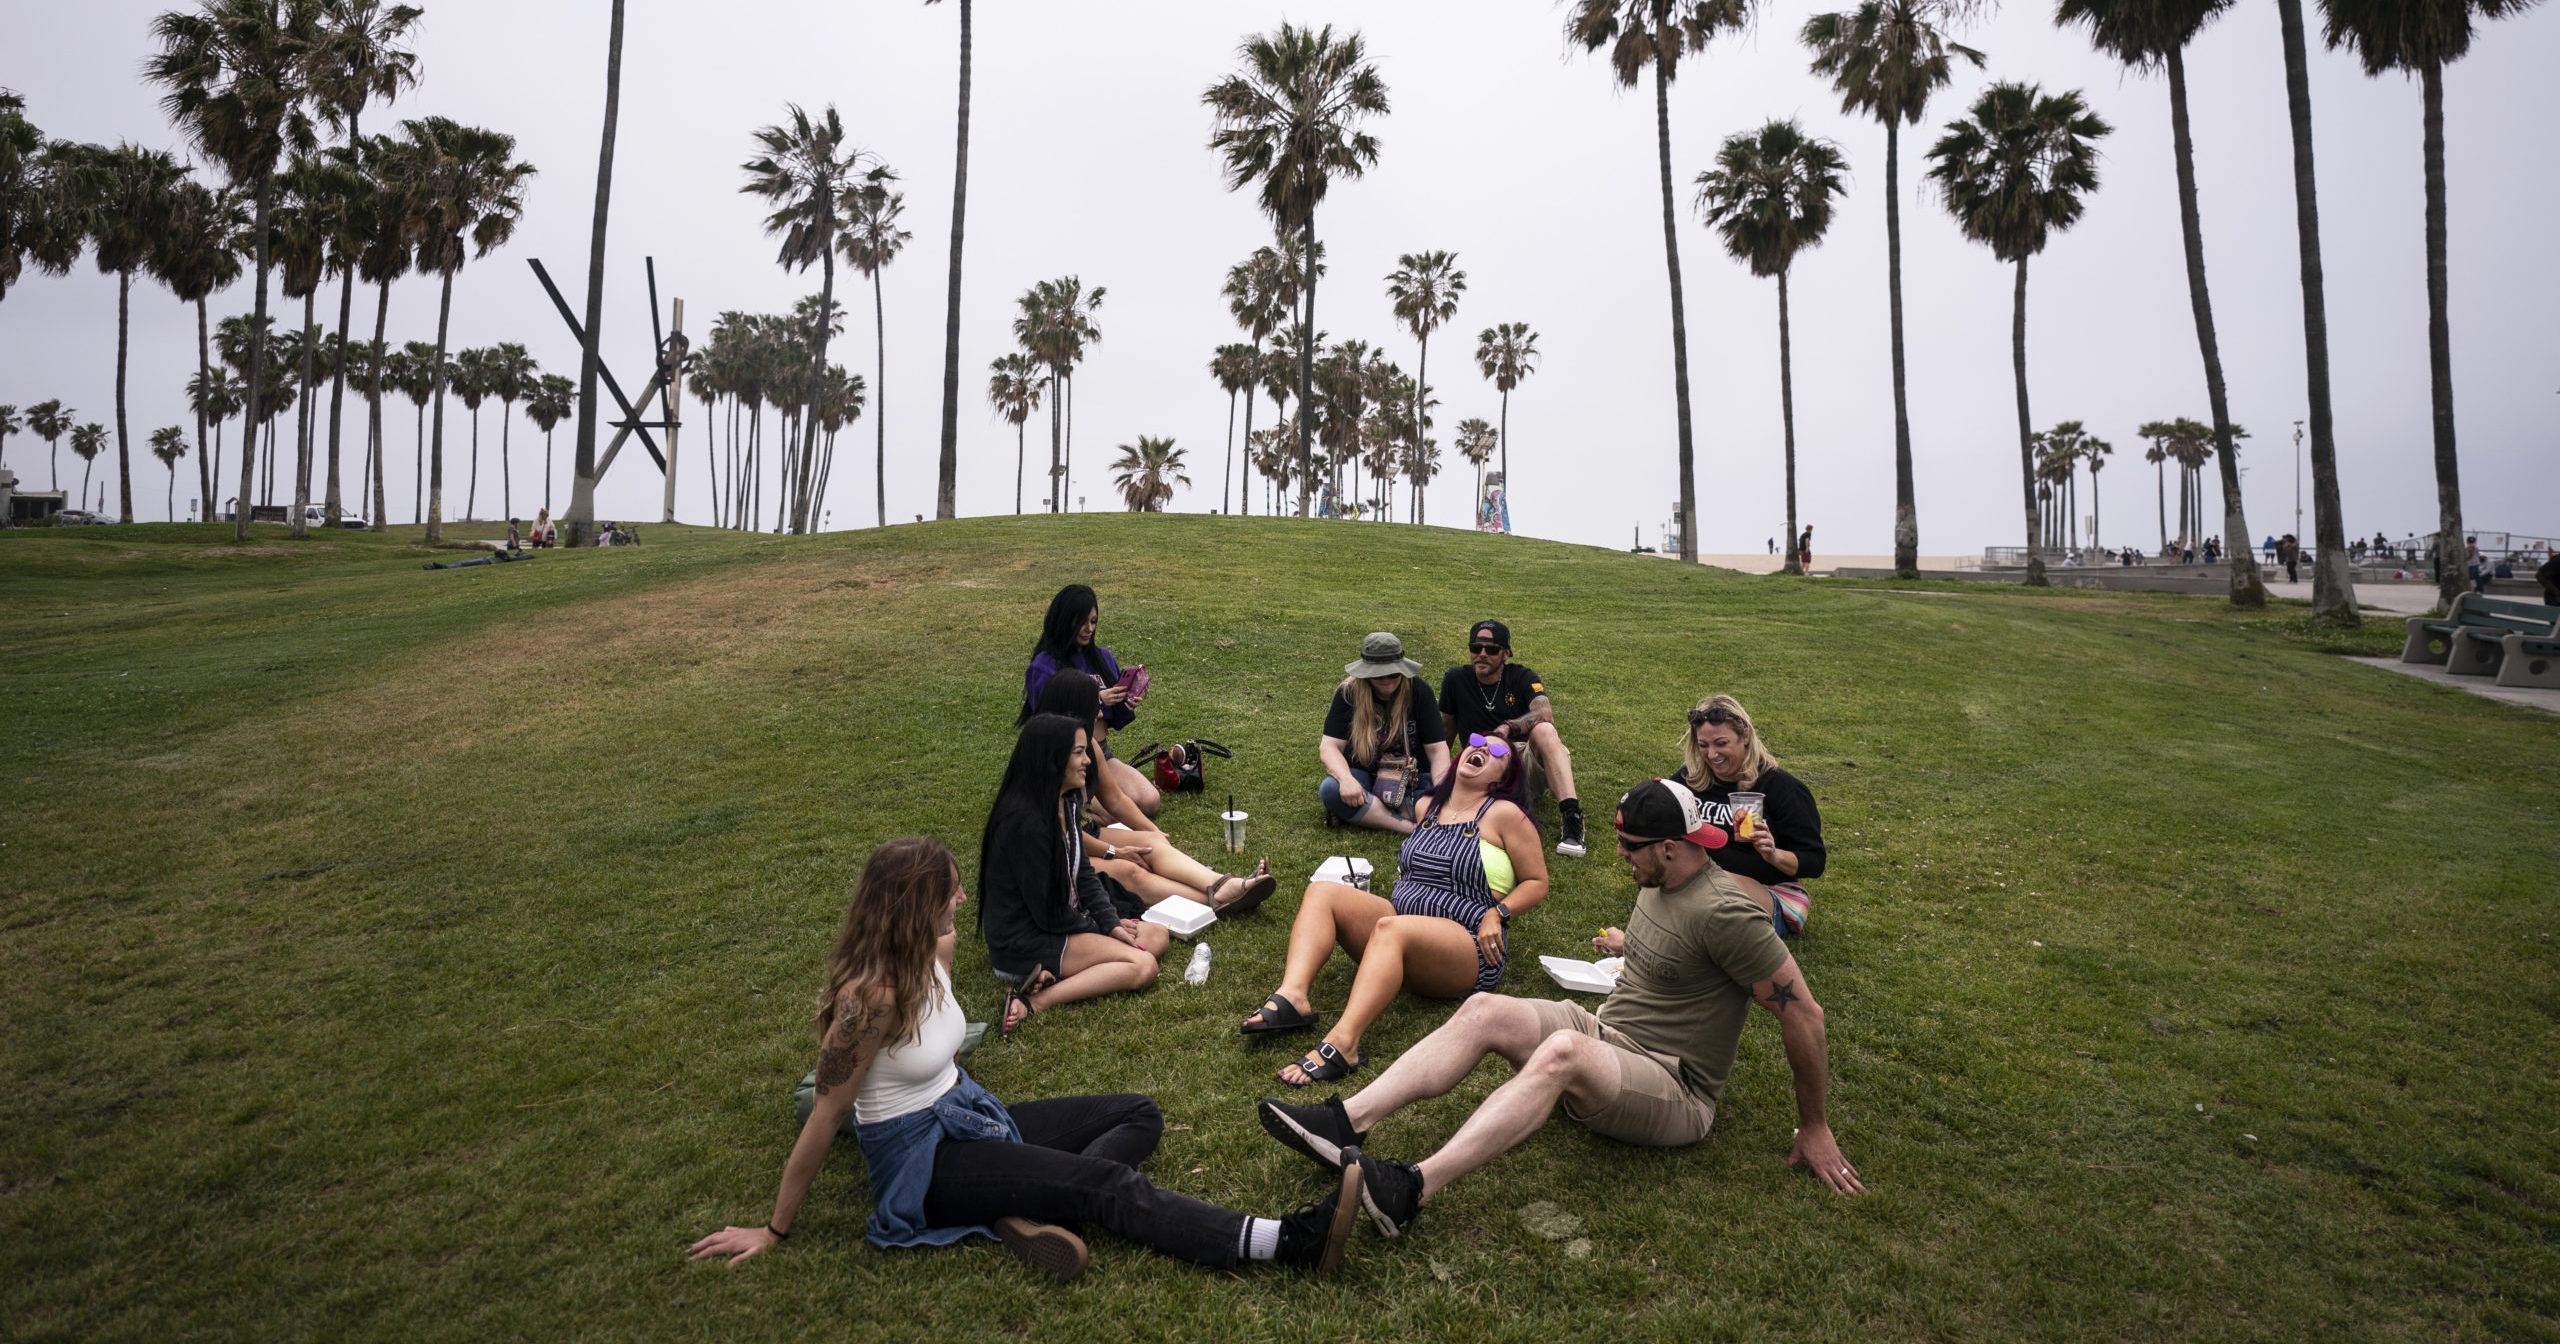 A group of friends mingle on the beach in Los Angeles on May 5, 2021.